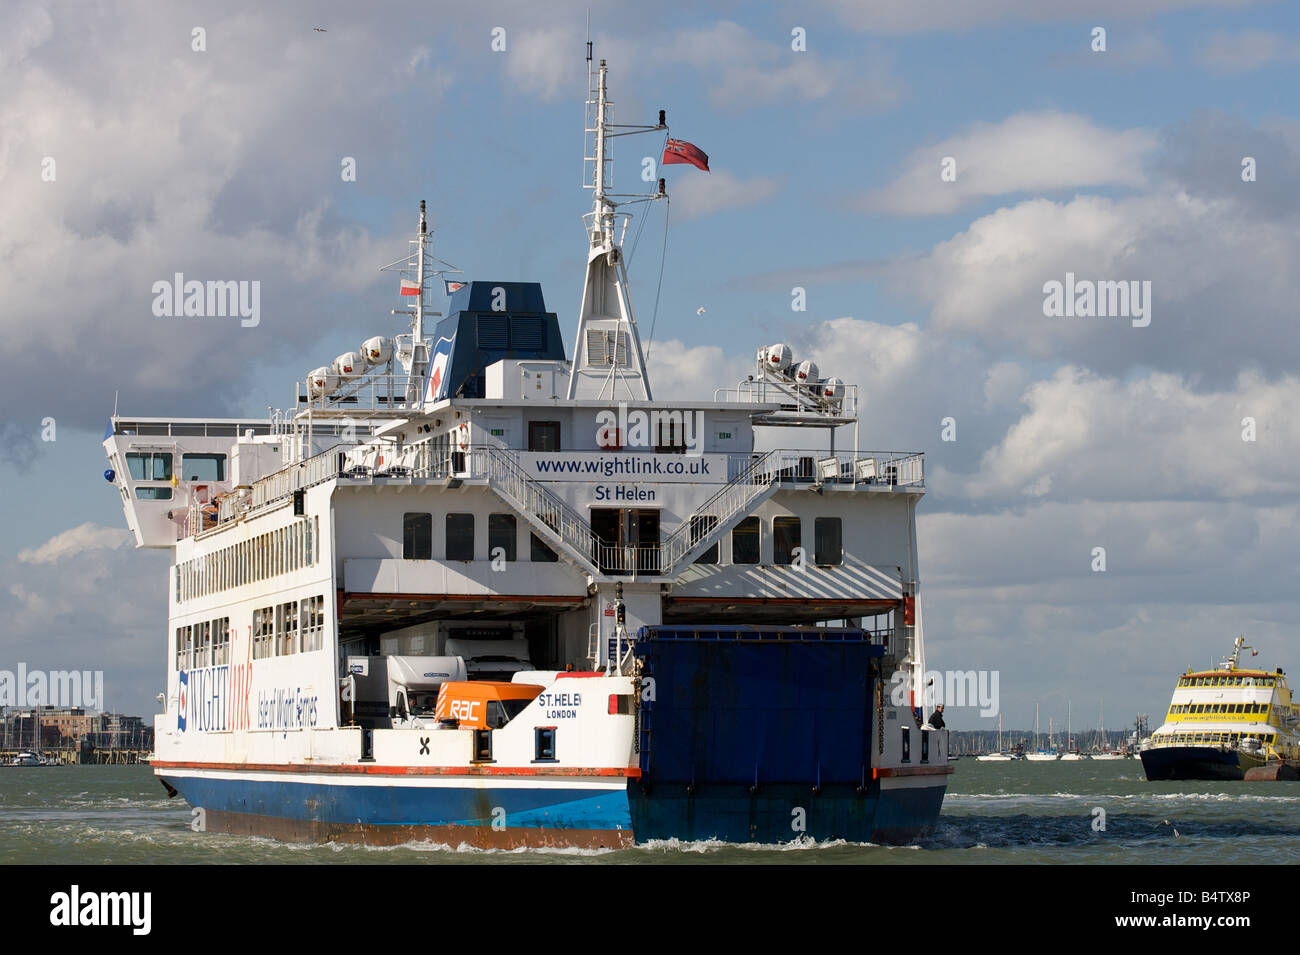 Wightlink ferry, Portsmouth, England. Stock Photo